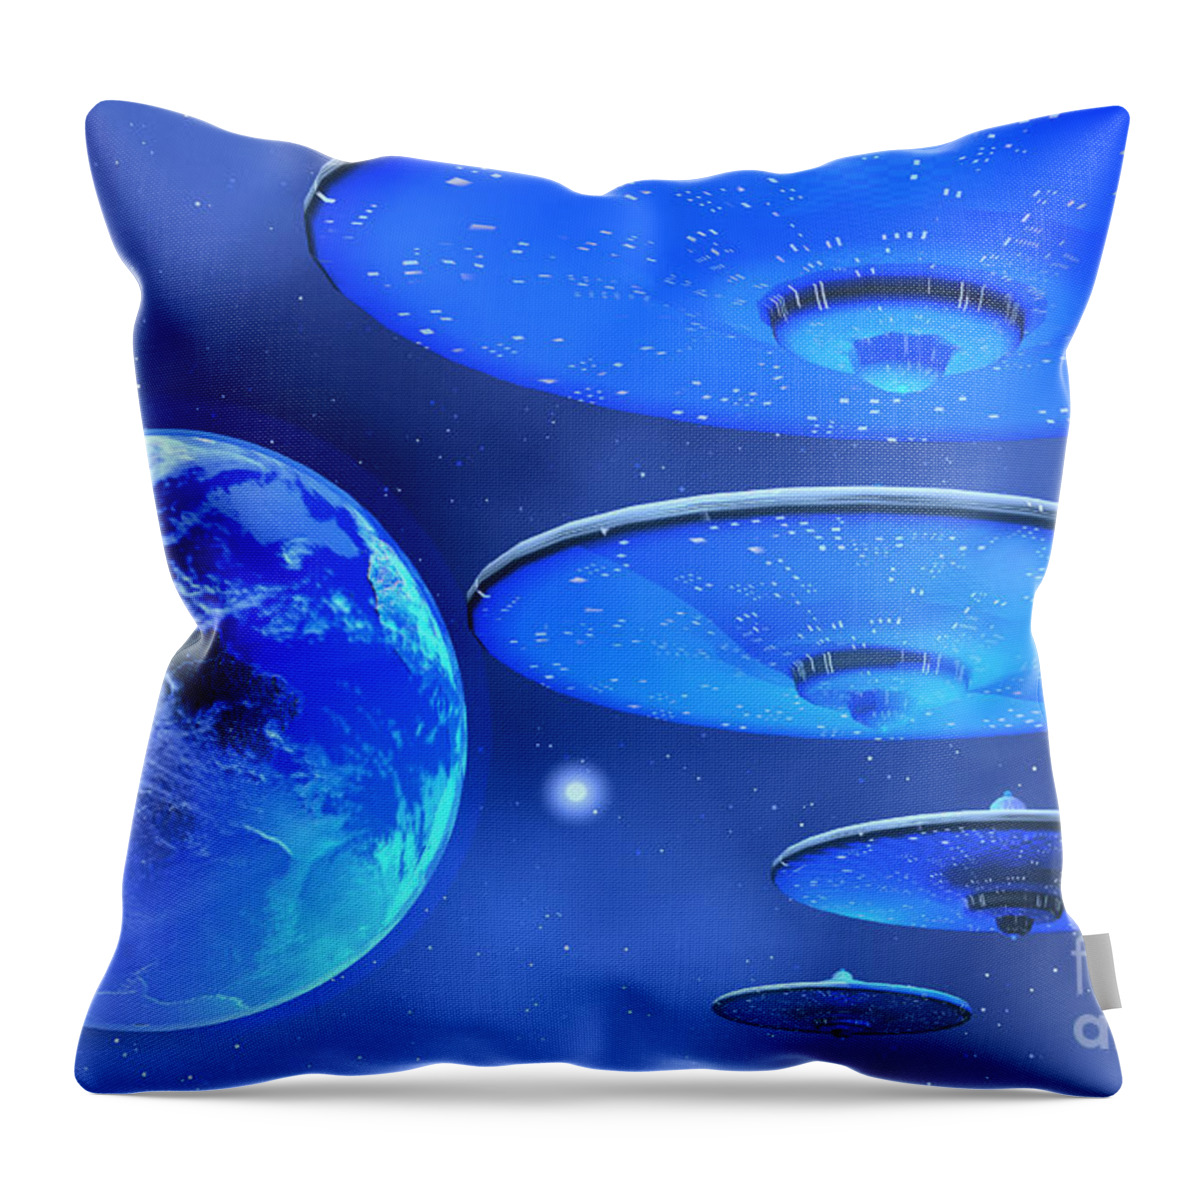 Space Art Throw Pillow featuring the painting Saucers by Corey Ford